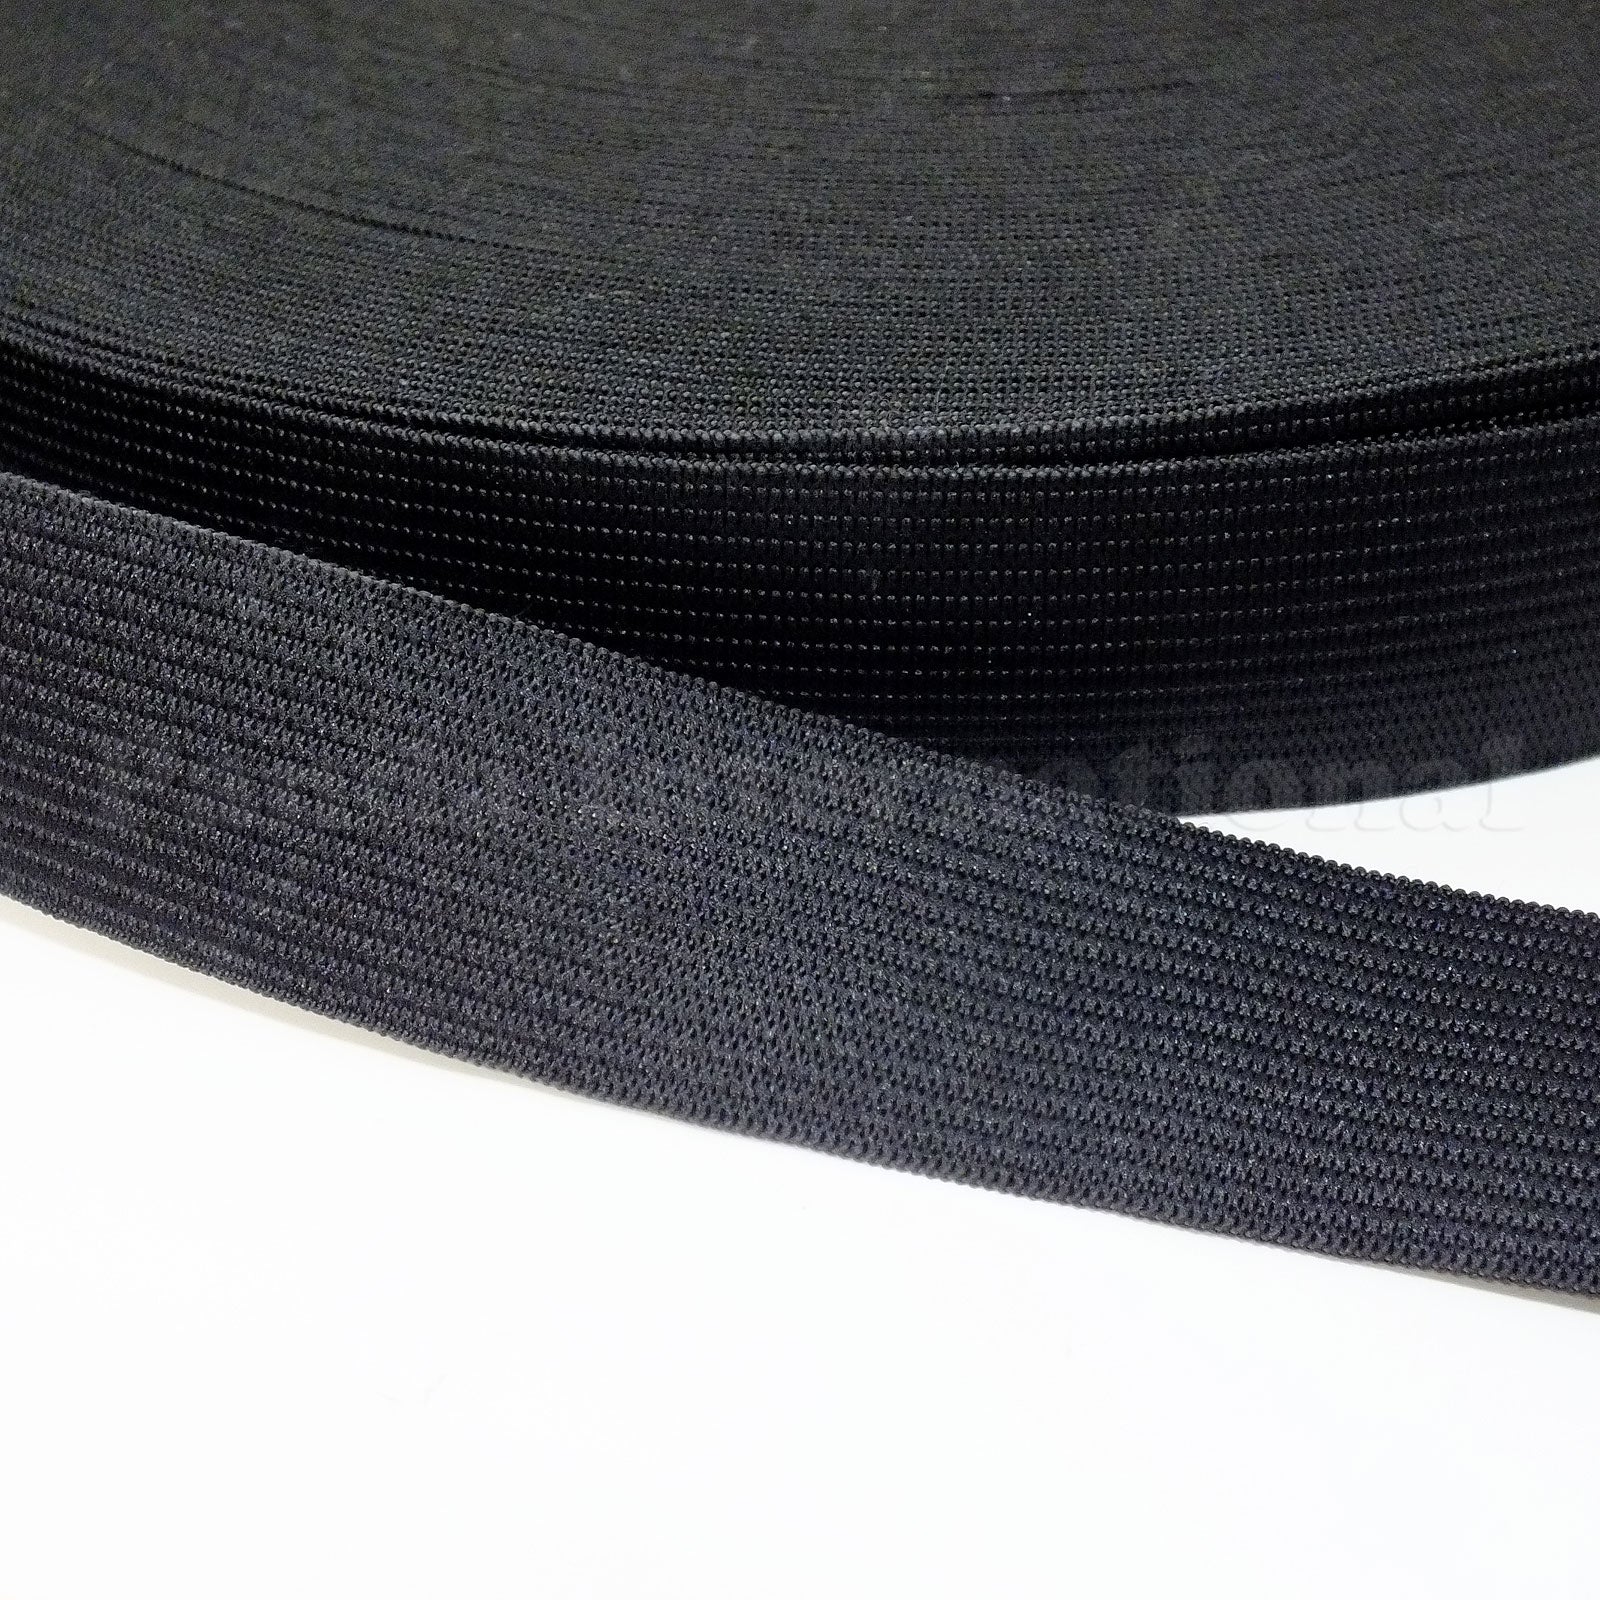 1.5" Knitted Elastic - Black or White - 1 Roll (50 Yds)